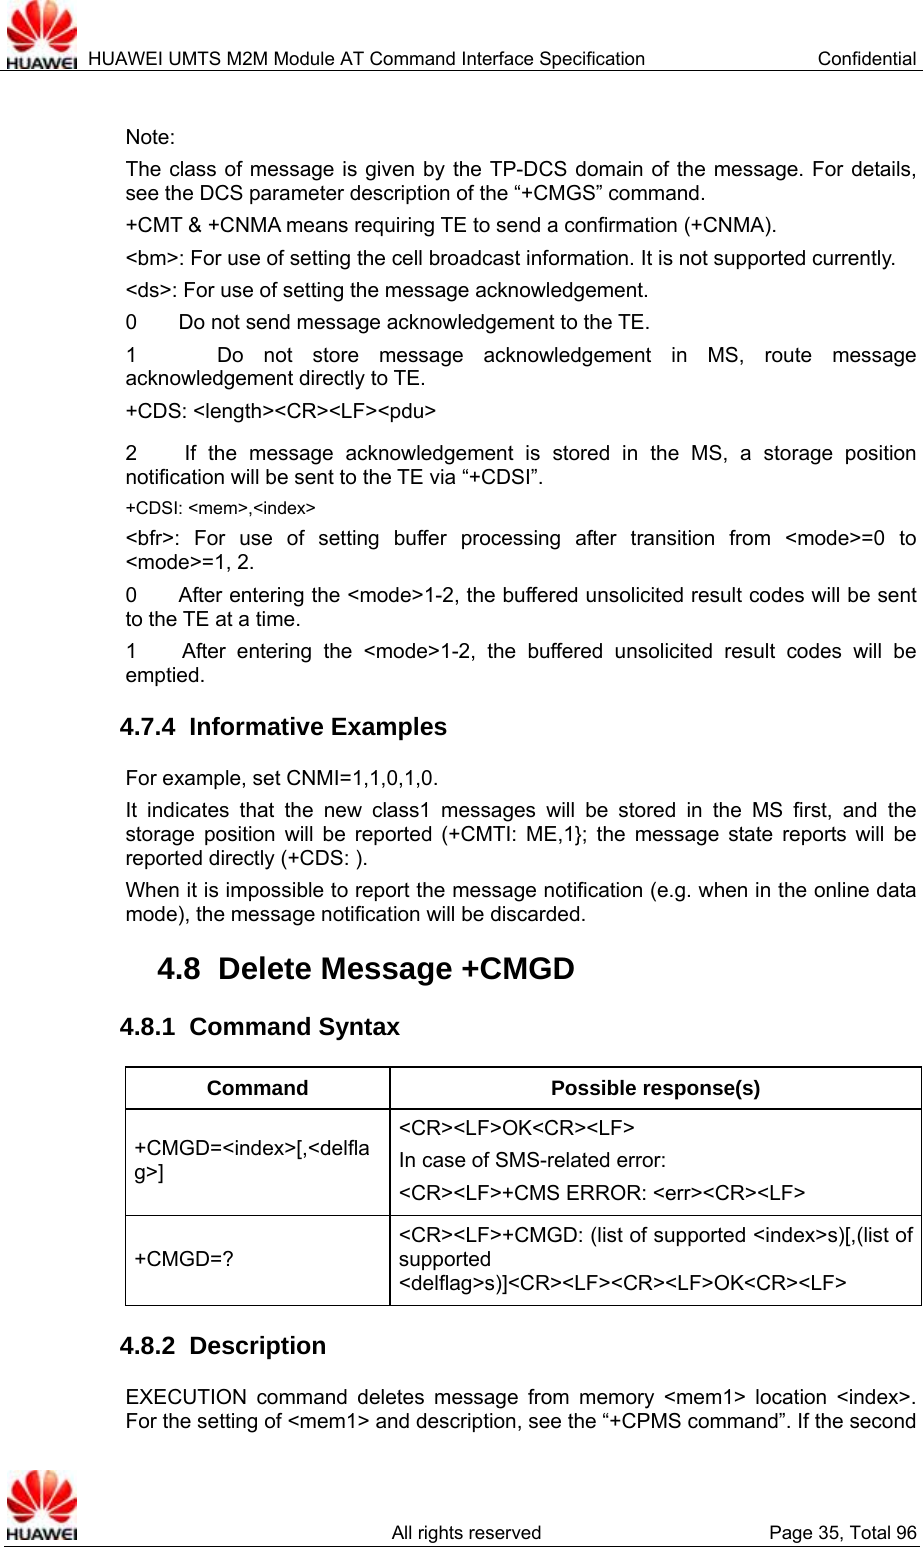  HUAWEI UMTS M2M Module AT Command Interface Specification  Confidential   All rights reserved  Page 35, Total 96  Note: The class of message is given by the TP-DCS domain of the message. For details, see the DCS parameter description of the “+CMGS” command.   +CMT &amp; +CNMA means requiring TE to send a confirmation (+CNMA).   &lt;bm&gt;: For use of setting the cell broadcast information. It is not supported currently.   &lt;ds&gt;: For use of setting the message acknowledgement. 0        Do not send message acknowledgement to the TE. 1    Do not store message acknowledgement in MS, route message acknowledgement directly to TE. +CDS: &lt;length&gt;&lt;CR&gt;&lt;LF&gt;&lt;pdu&gt; 2    If the message acknowledgement is stored in the MS, a storage position notification will be sent to the TE via “+CDSI”.   +CDSI: &lt;mem&gt;,&lt;index&gt; &lt;bfr&gt;: For use of setting buffer processing after transition from &lt;mode&gt;=0 to &lt;mode&gt;=1, 2. 0        After entering the &lt;mode&gt;1-2, the buffered unsolicited result codes will be sent to the TE at a time.   1    After entering the &lt;mode&gt;1-2, the buffered unsolicited result codes will be emptied.  4.7.4  Informative Examples For example, set CNMI=1,1,0,1,0. It indicates that the new class1 messages will be stored in the MS first, and the storage position will be reported (+CMTI: ME,1}; the message state reports will be reported directly (+CDS: ). When it is impossible to report the message notification (e.g. when in the online data mode), the message notification will be discarded.   4.8  Delete Message +CMGD 4.8.1  Command Syntax Command Possible response(s) +CMGD=&lt;index&gt;[,&lt;delflag&gt;] &lt;CR&gt;&lt;LF&gt;OK&lt;CR&gt;&lt;LF&gt; In case of SMS-related error:   &lt;CR&gt;&lt;LF&gt;+CMS ERROR: &lt;err&gt;&lt;CR&gt;&lt;LF&gt; +CMGD=? &lt;CR&gt;&lt;LF&gt;+CMGD: (list of supported &lt;index&gt;s)[,(list of supported &lt;delflag&gt;s)]&lt;CR&gt;&lt;LF&gt;&lt;CR&gt;&lt;LF&gt;OK&lt;CR&gt;&lt;LF&gt; 4.8.2  Description EXECUTION command deletes message from memory &lt;mem1&gt; location &lt;index&gt;. For the setting of &lt;mem1&gt; and description, see the “+CPMS command”. If the second 